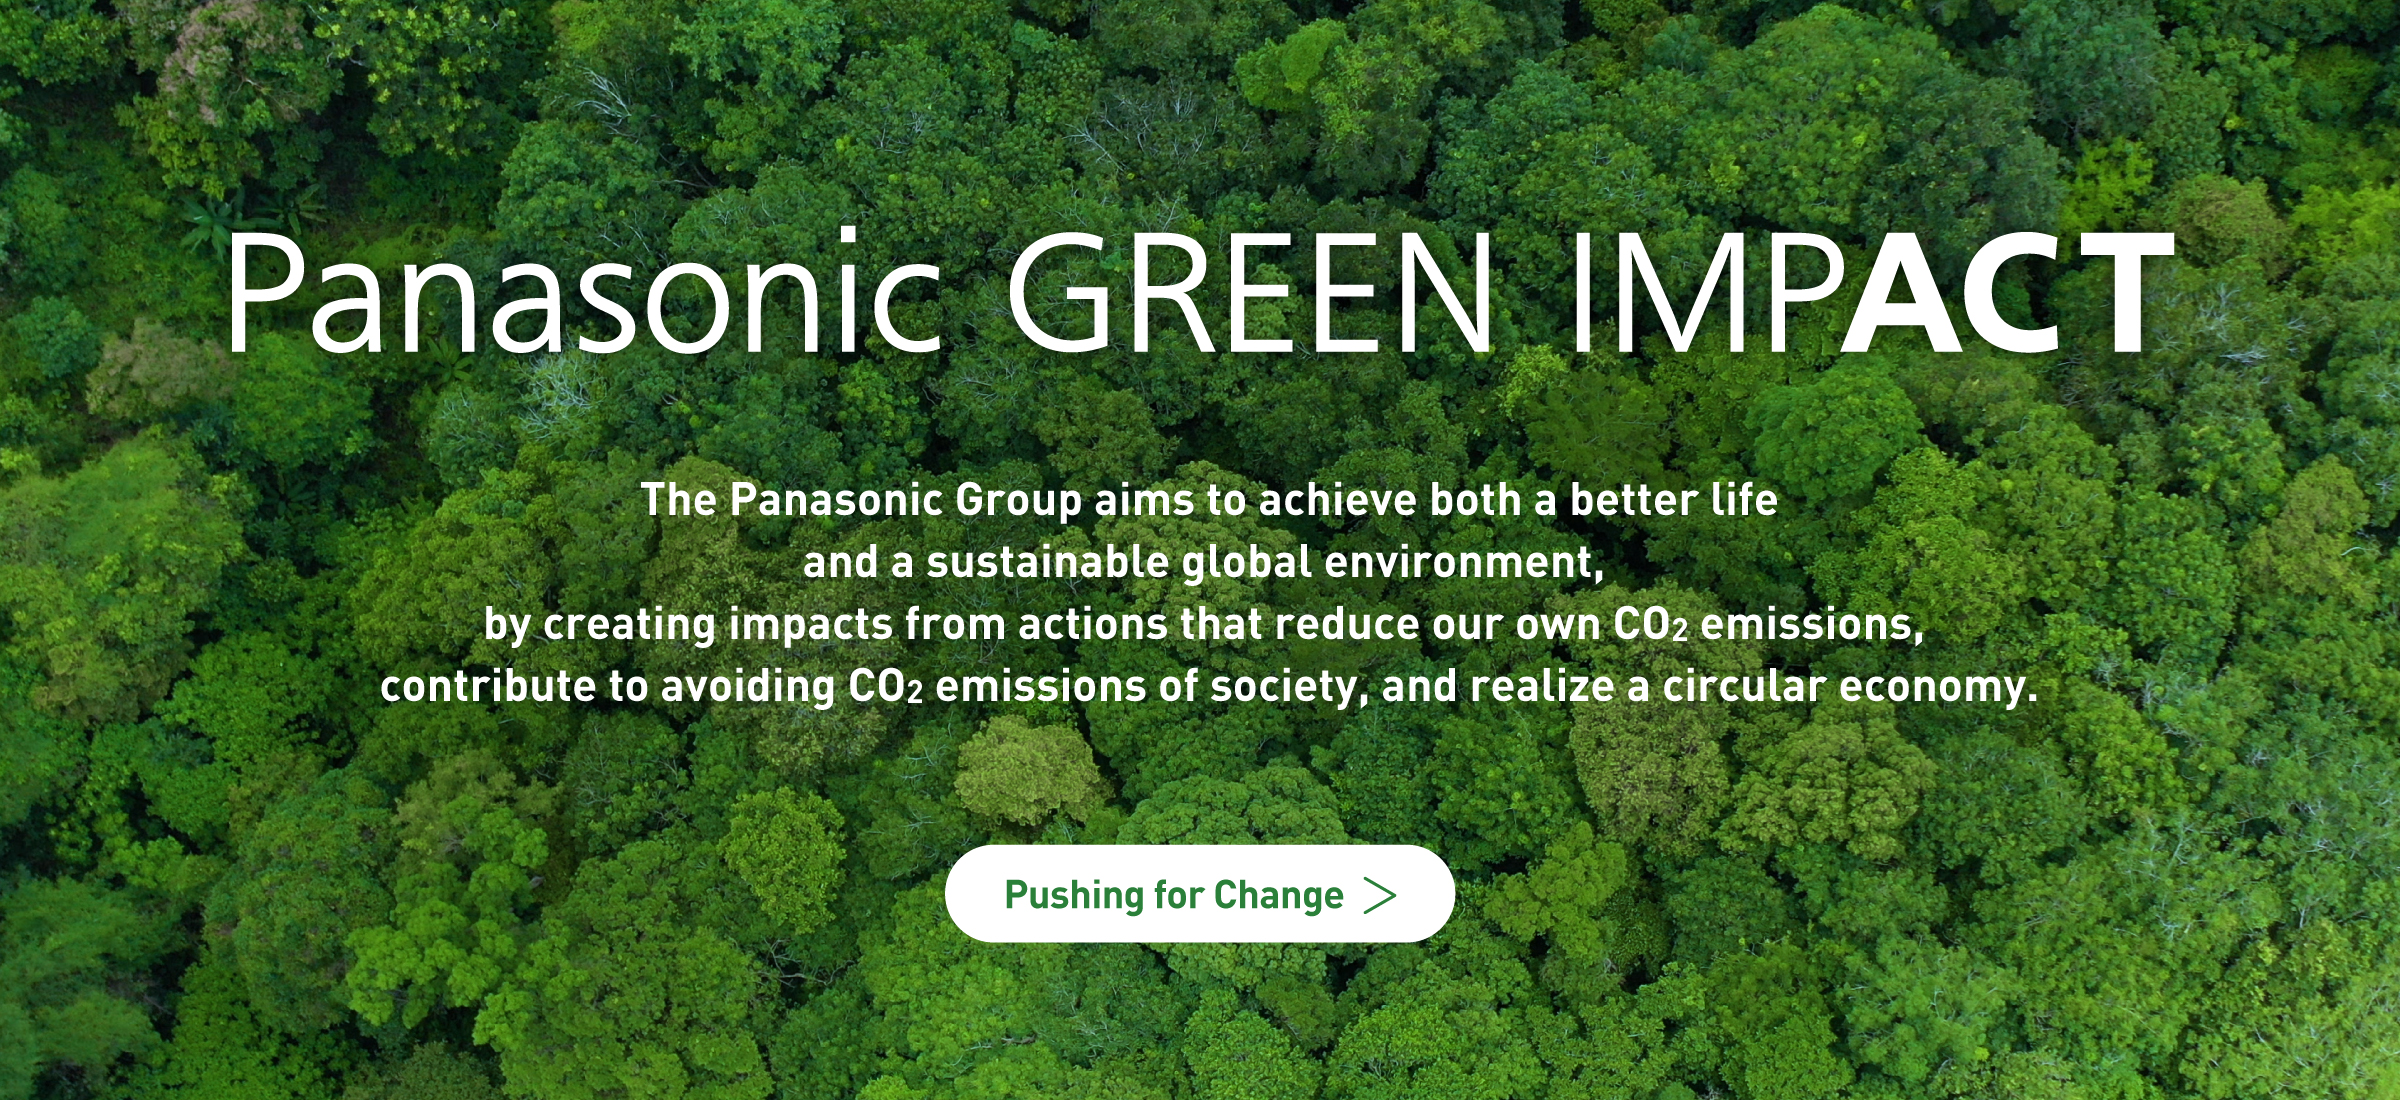 The Panasonic Group aims to achieve both a better life and a sustainable global environment, by creating impacts from actions that reduce our own CO2 emissions, contribute to avoiding CO2 emissions of society, and realize a circular economy. Pushing for Change